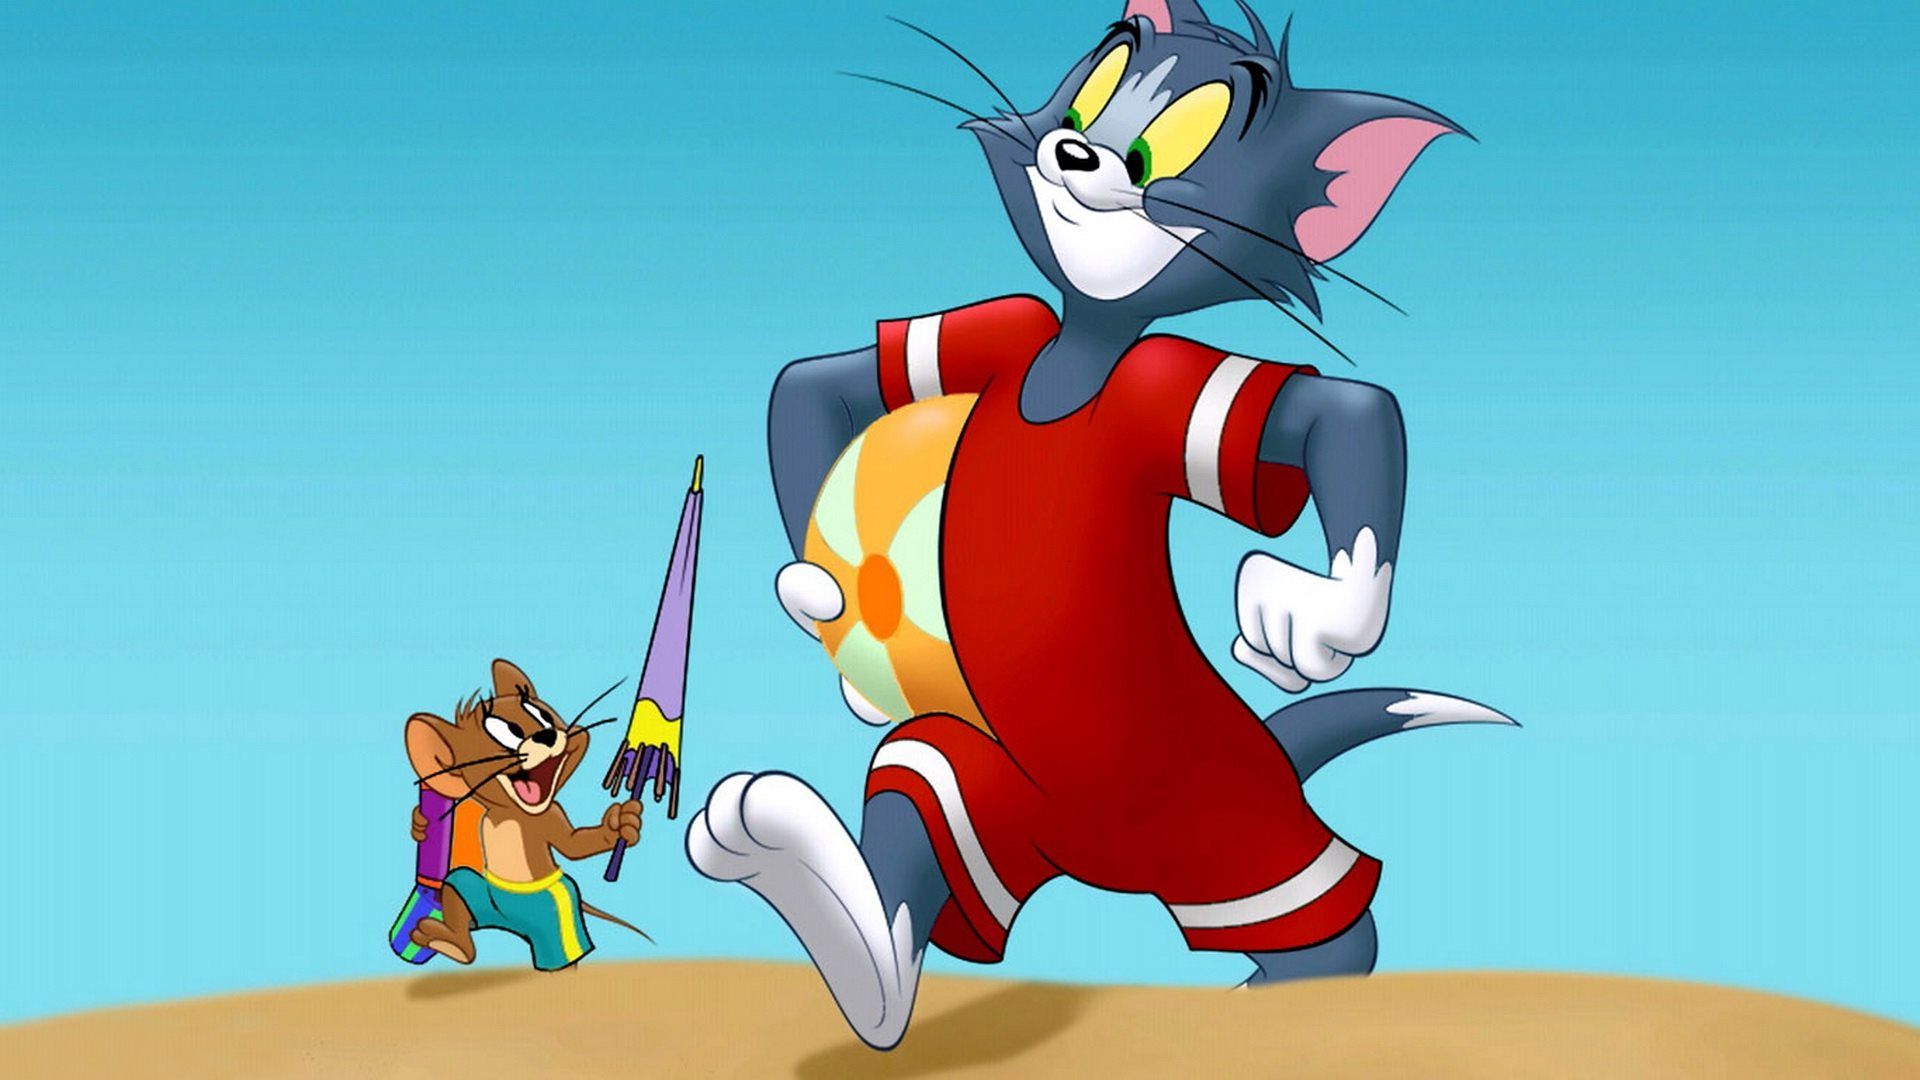 Tom And Jerry On Beach Wallpaper Image 6 Wallpaper. Tom and jerry cartoon, Cartoons hd, Cartoon wallpaper hd